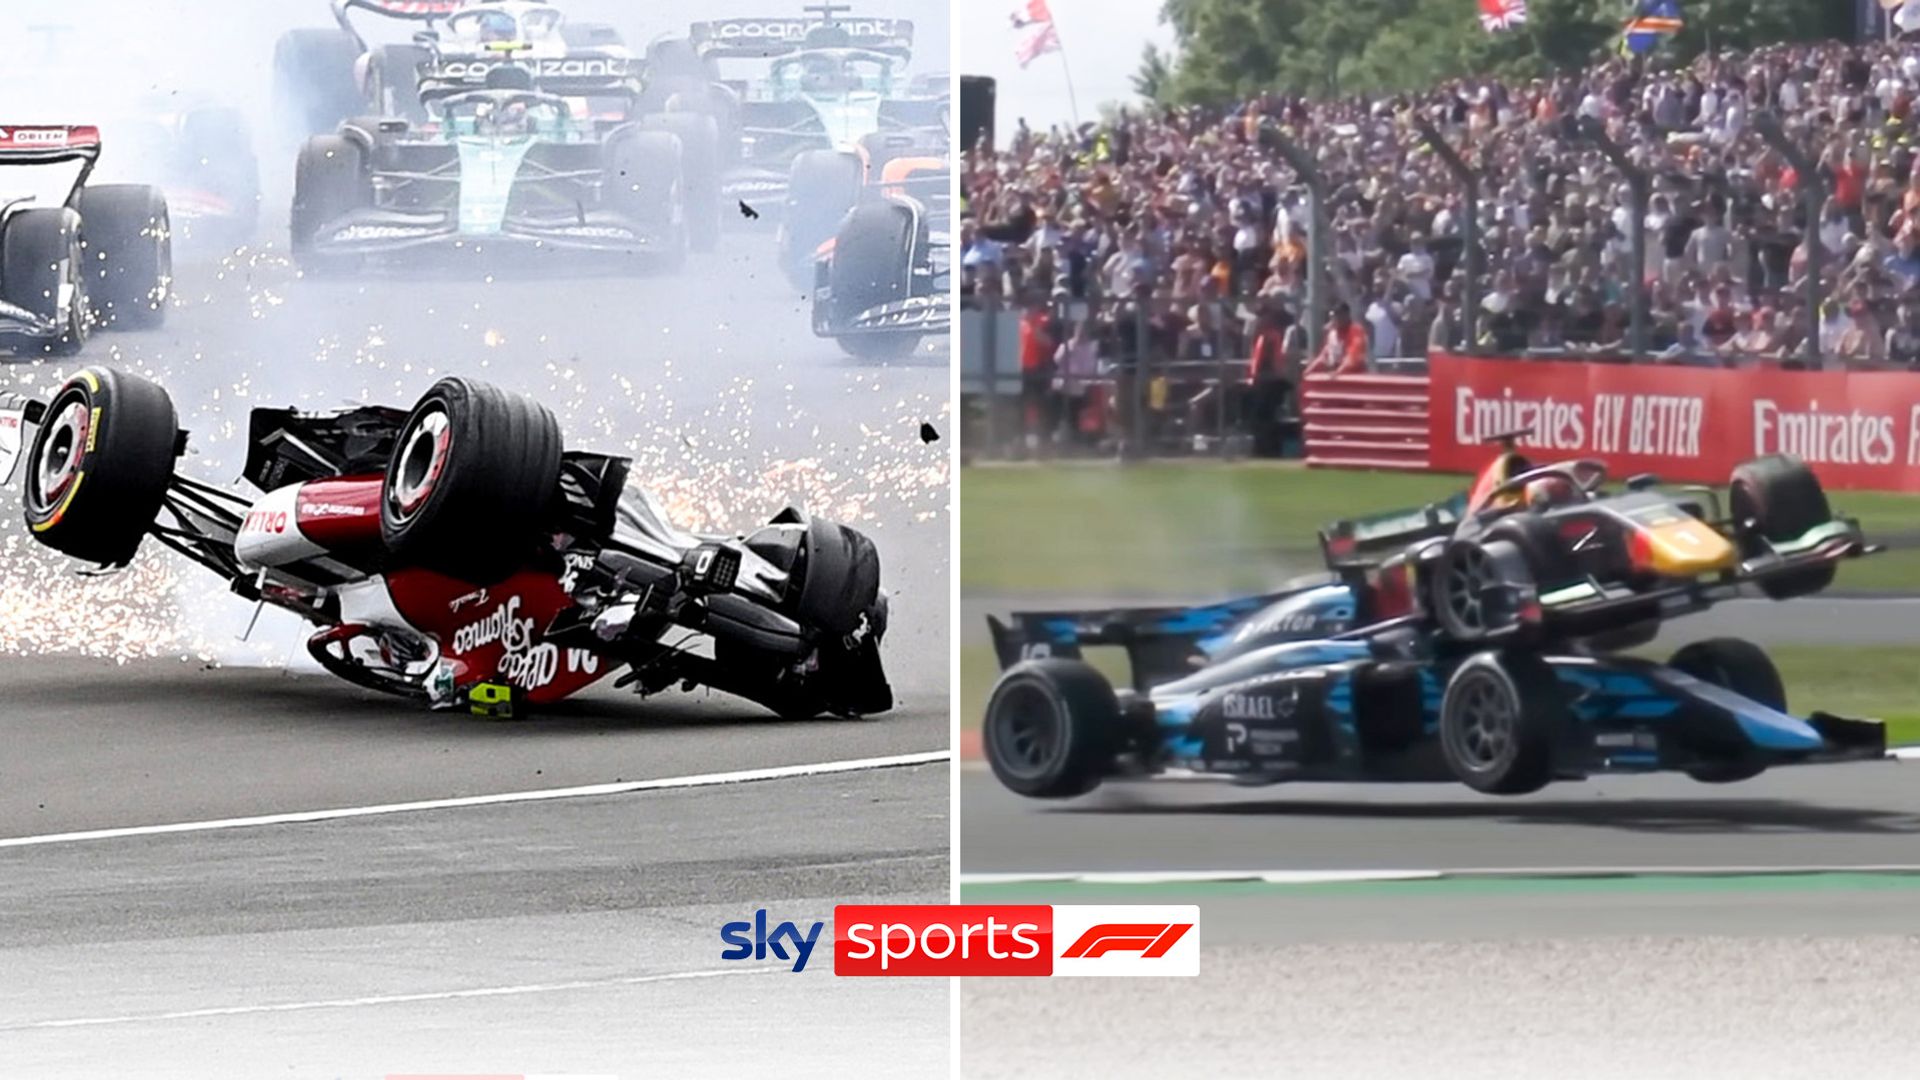 F1 halo 'saved two lives' at Silverstone | Drivers hail accident safety